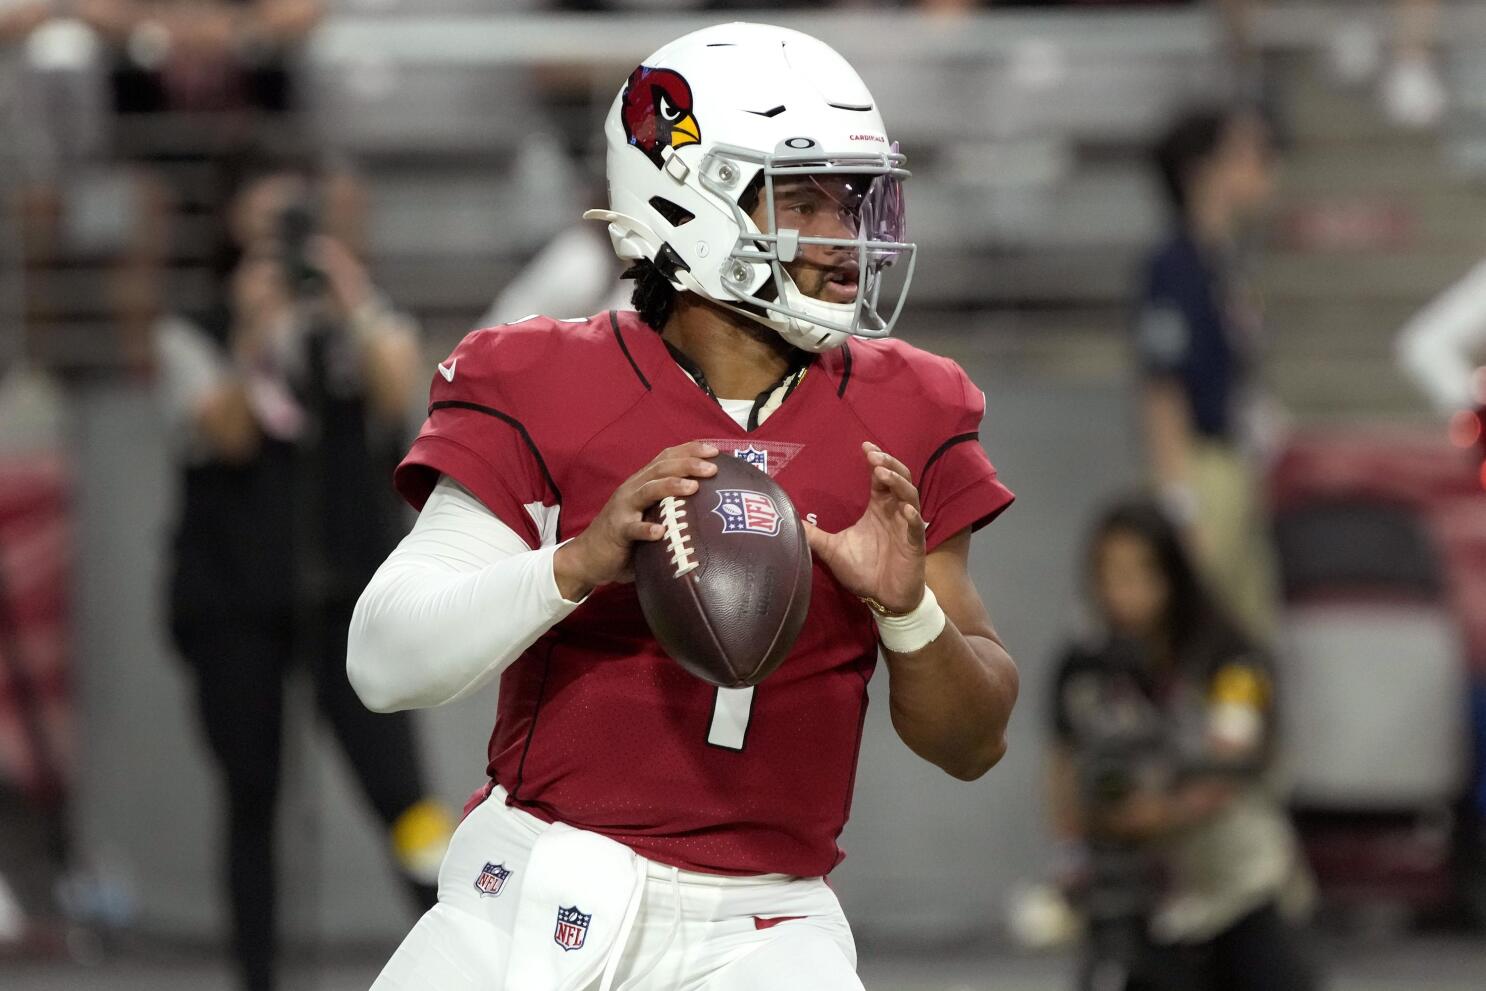 Years later, Arizona's Larry Fitzgerald ready for another playoff run